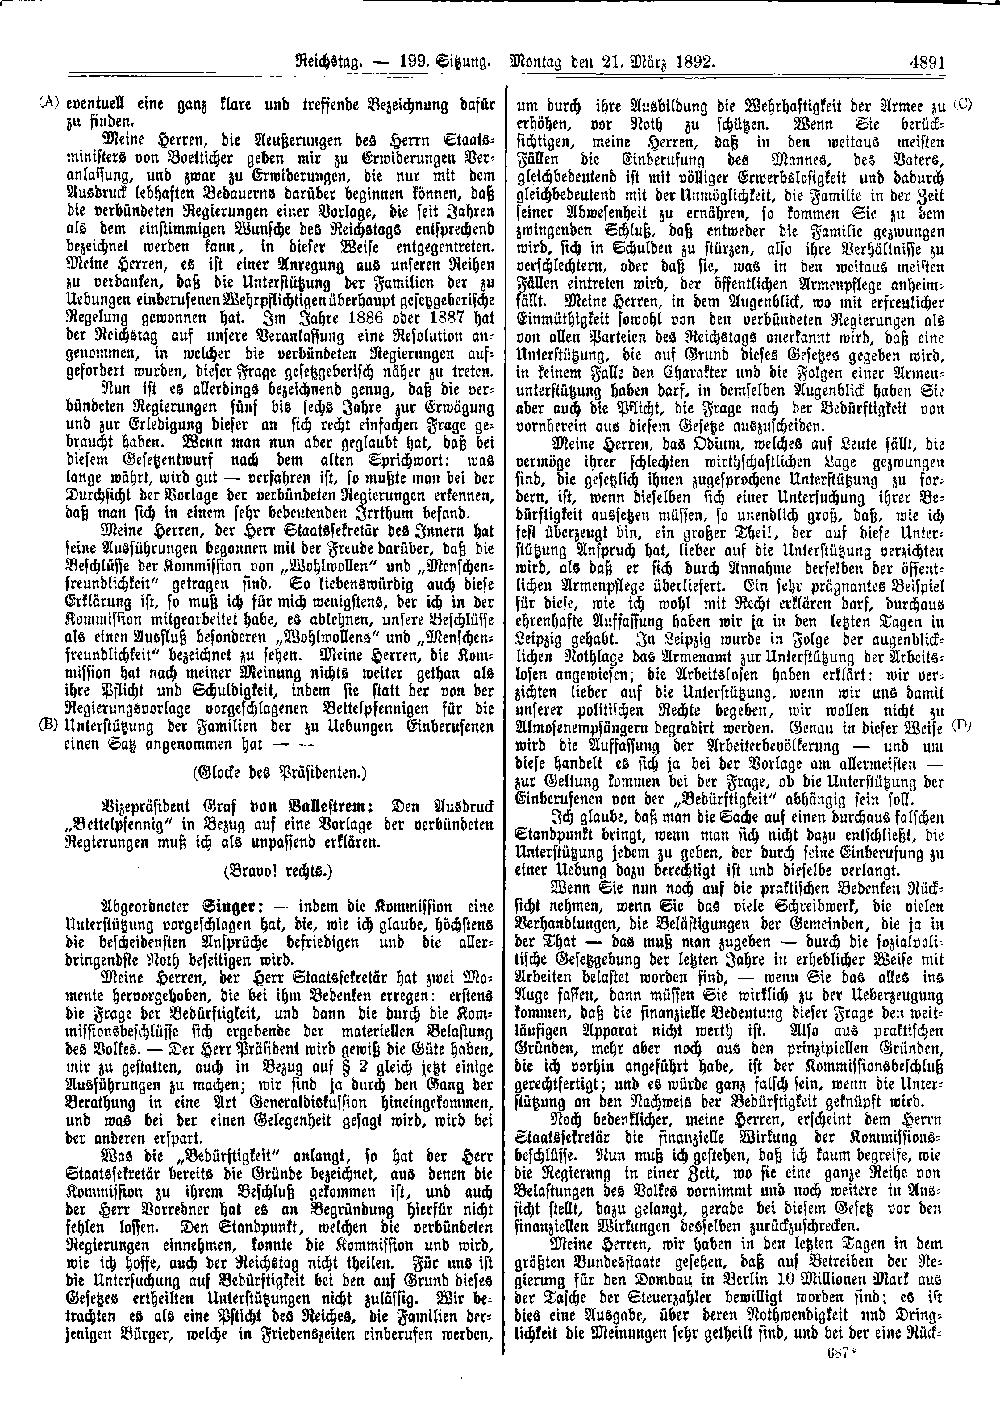 Scan of page 4891